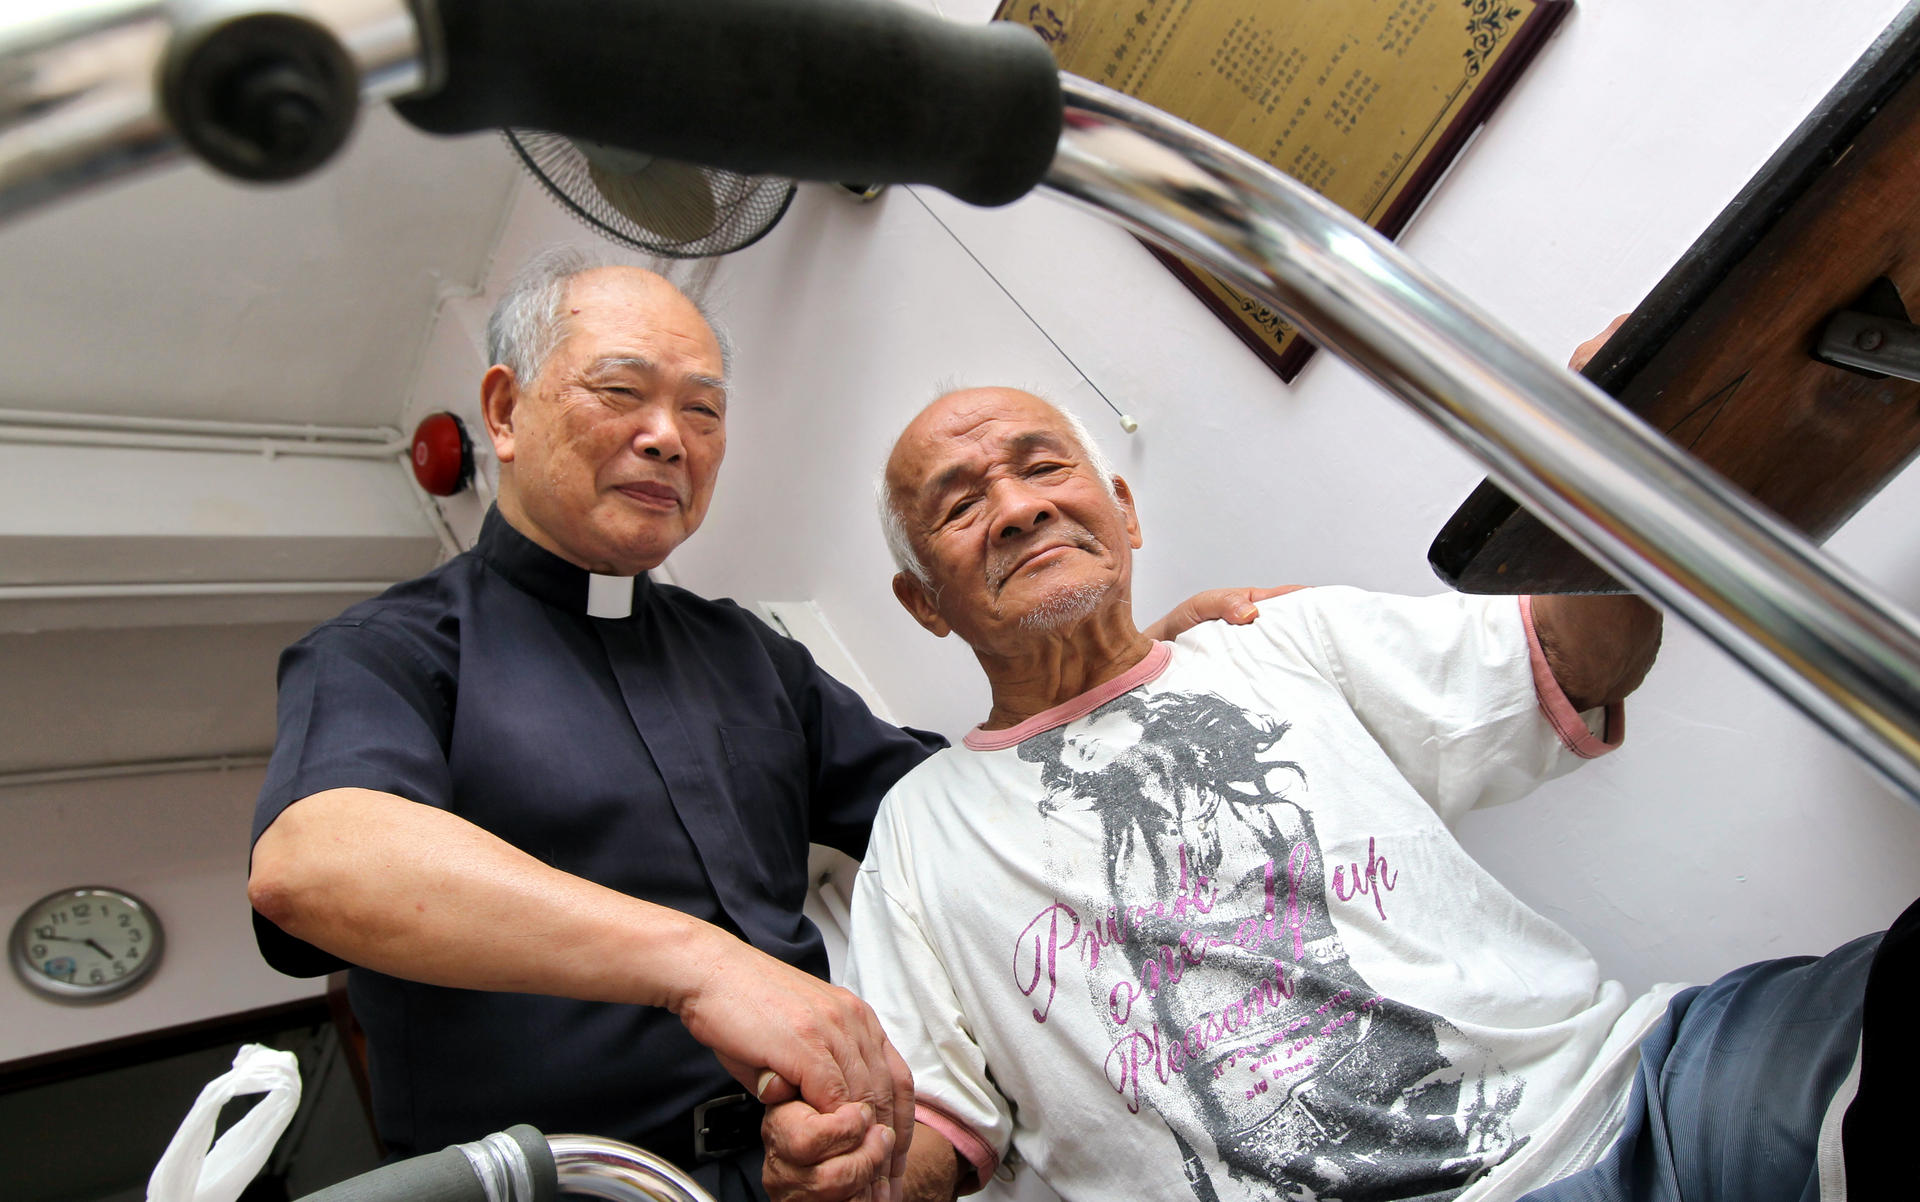 Pastor Lee Mo-fan was delighted to give street sleeper Wong Wah a helping hand. Photo: K.Y. Cheng